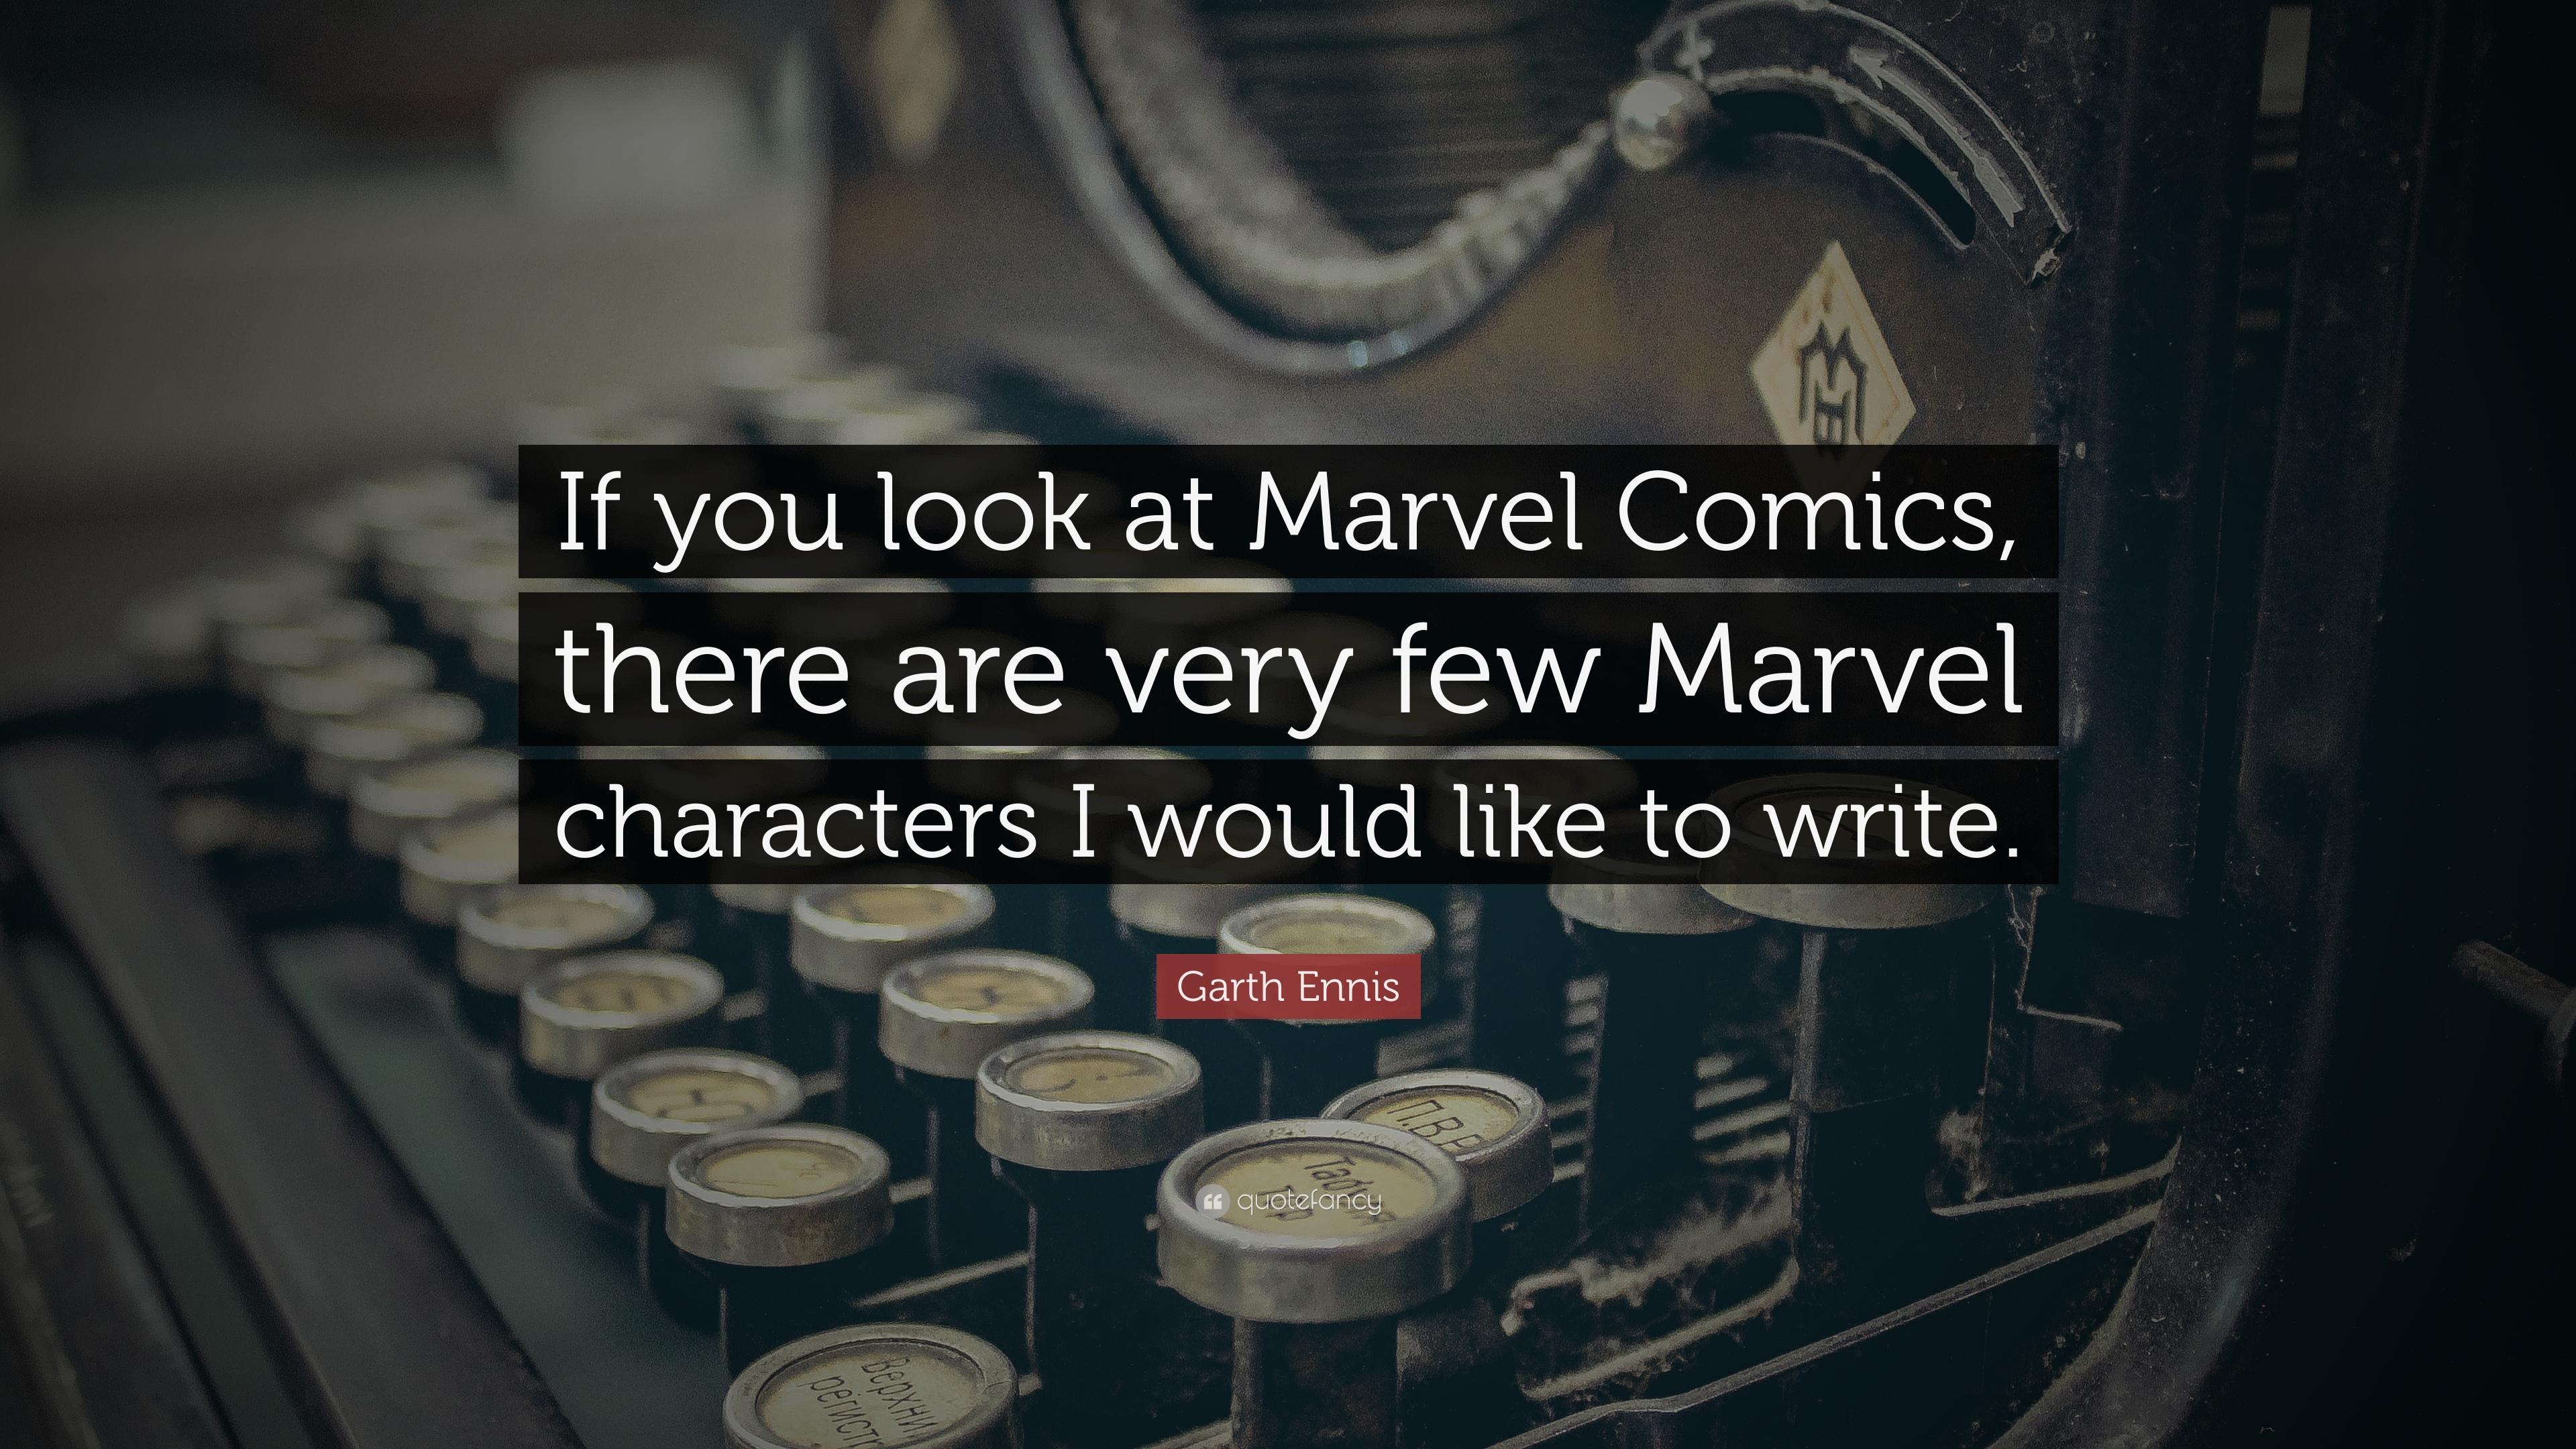 Garth Ennis Quote: “If you look at Marvel Comics, there are very few